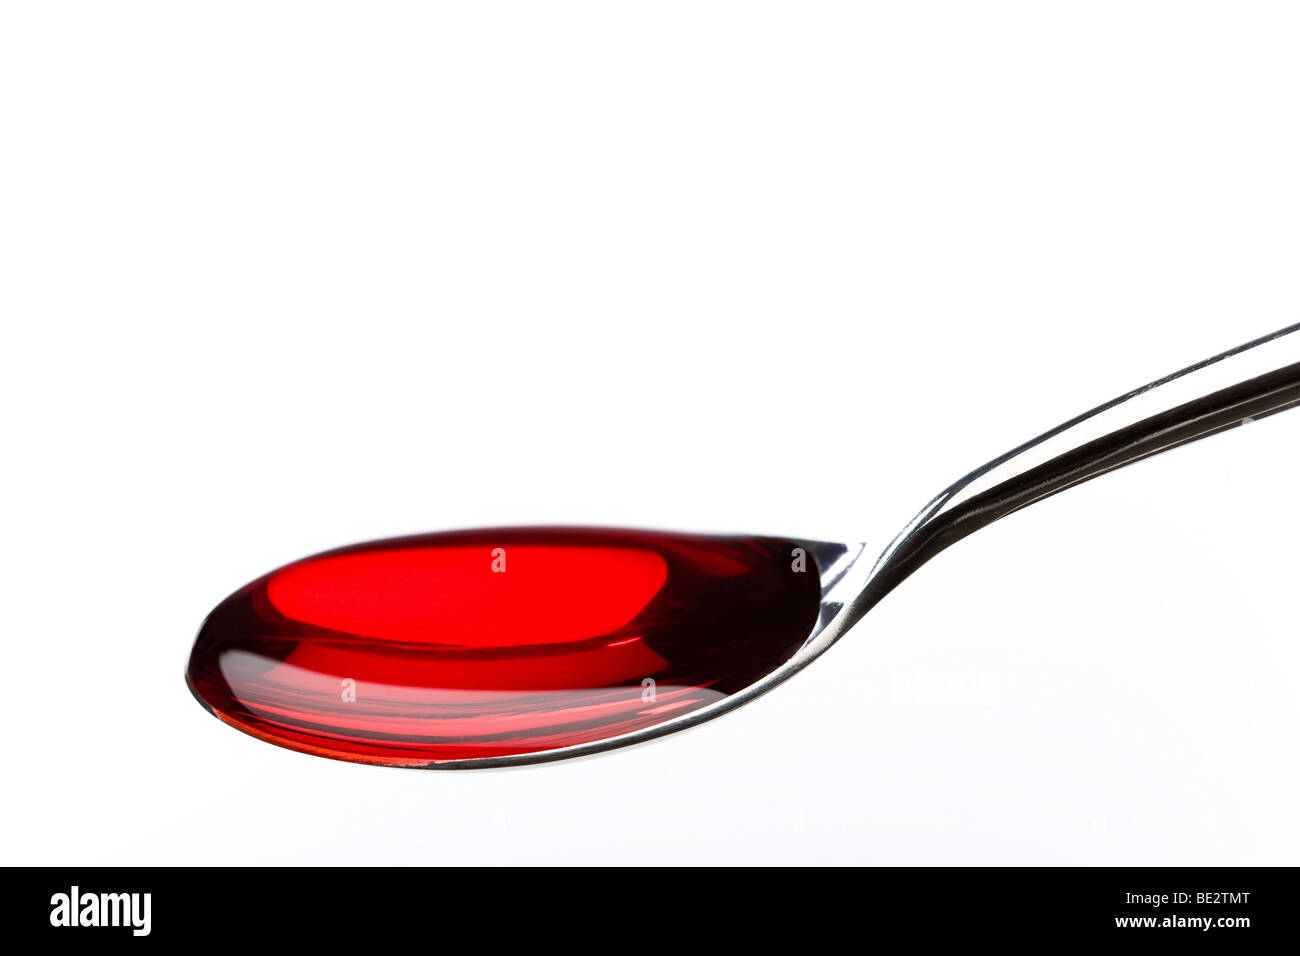 Spoon filled with red medicine Stock Photo